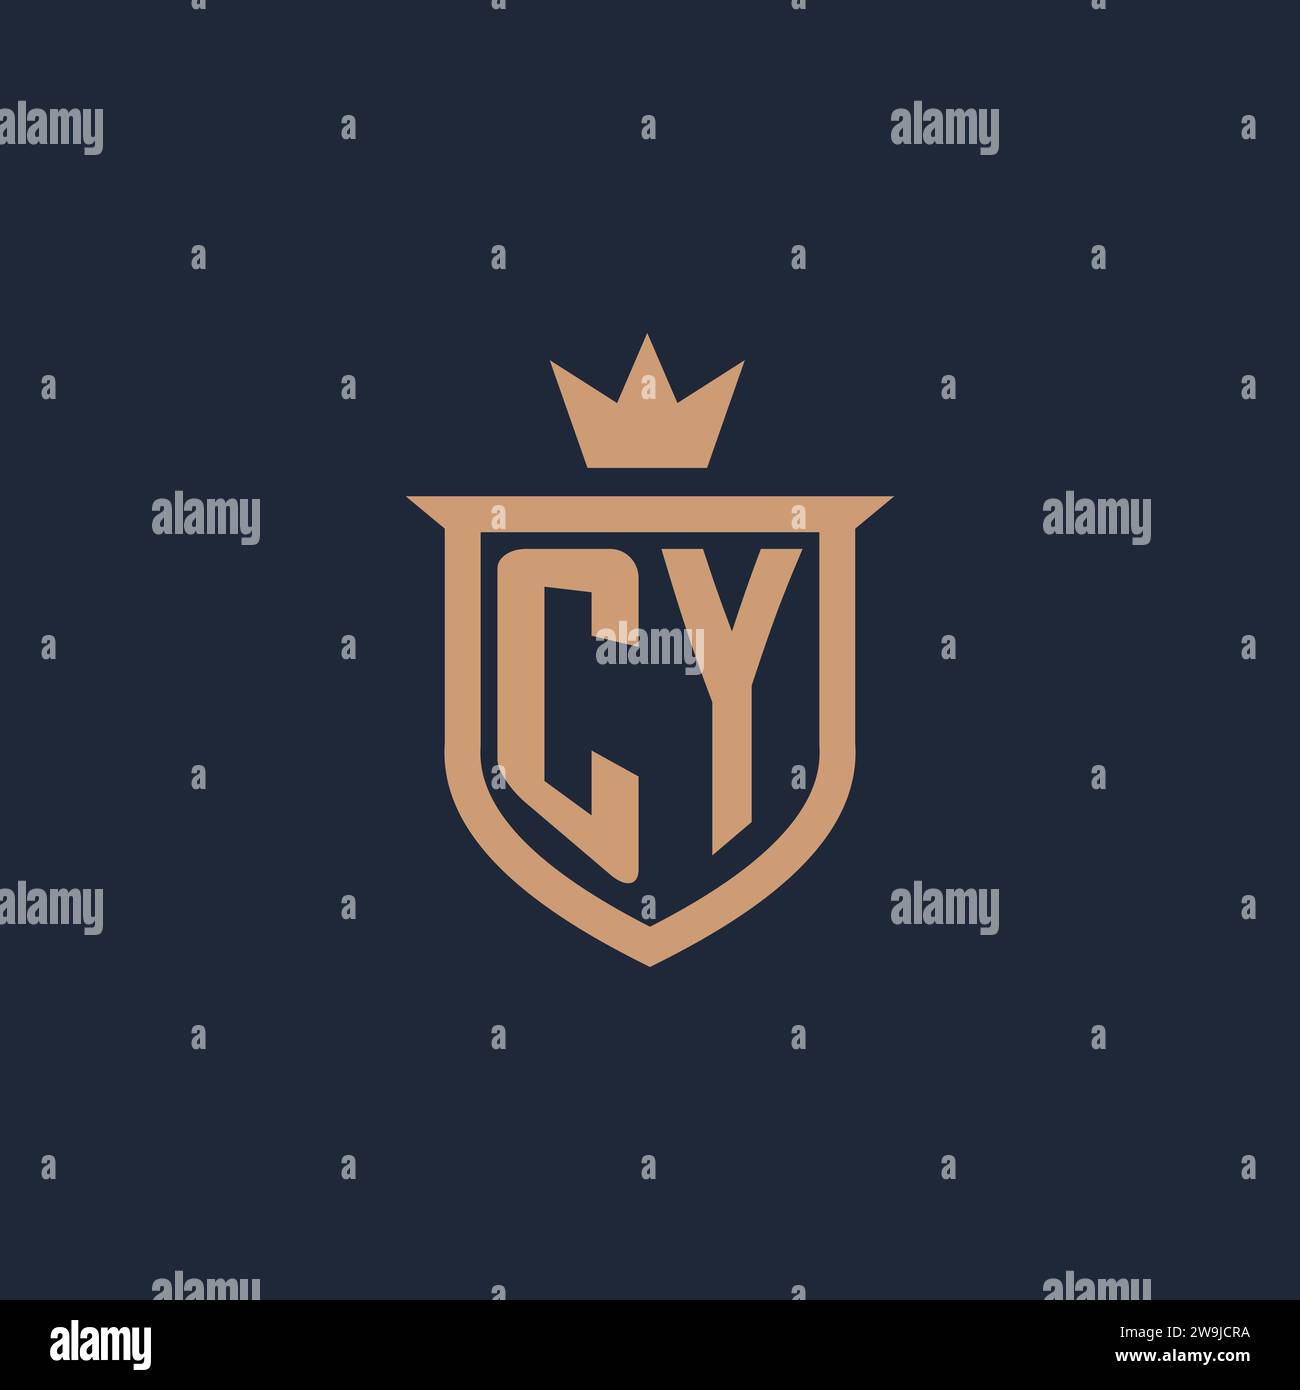 CY monogram initial logo with shield and crown style design ideas Stock Vector